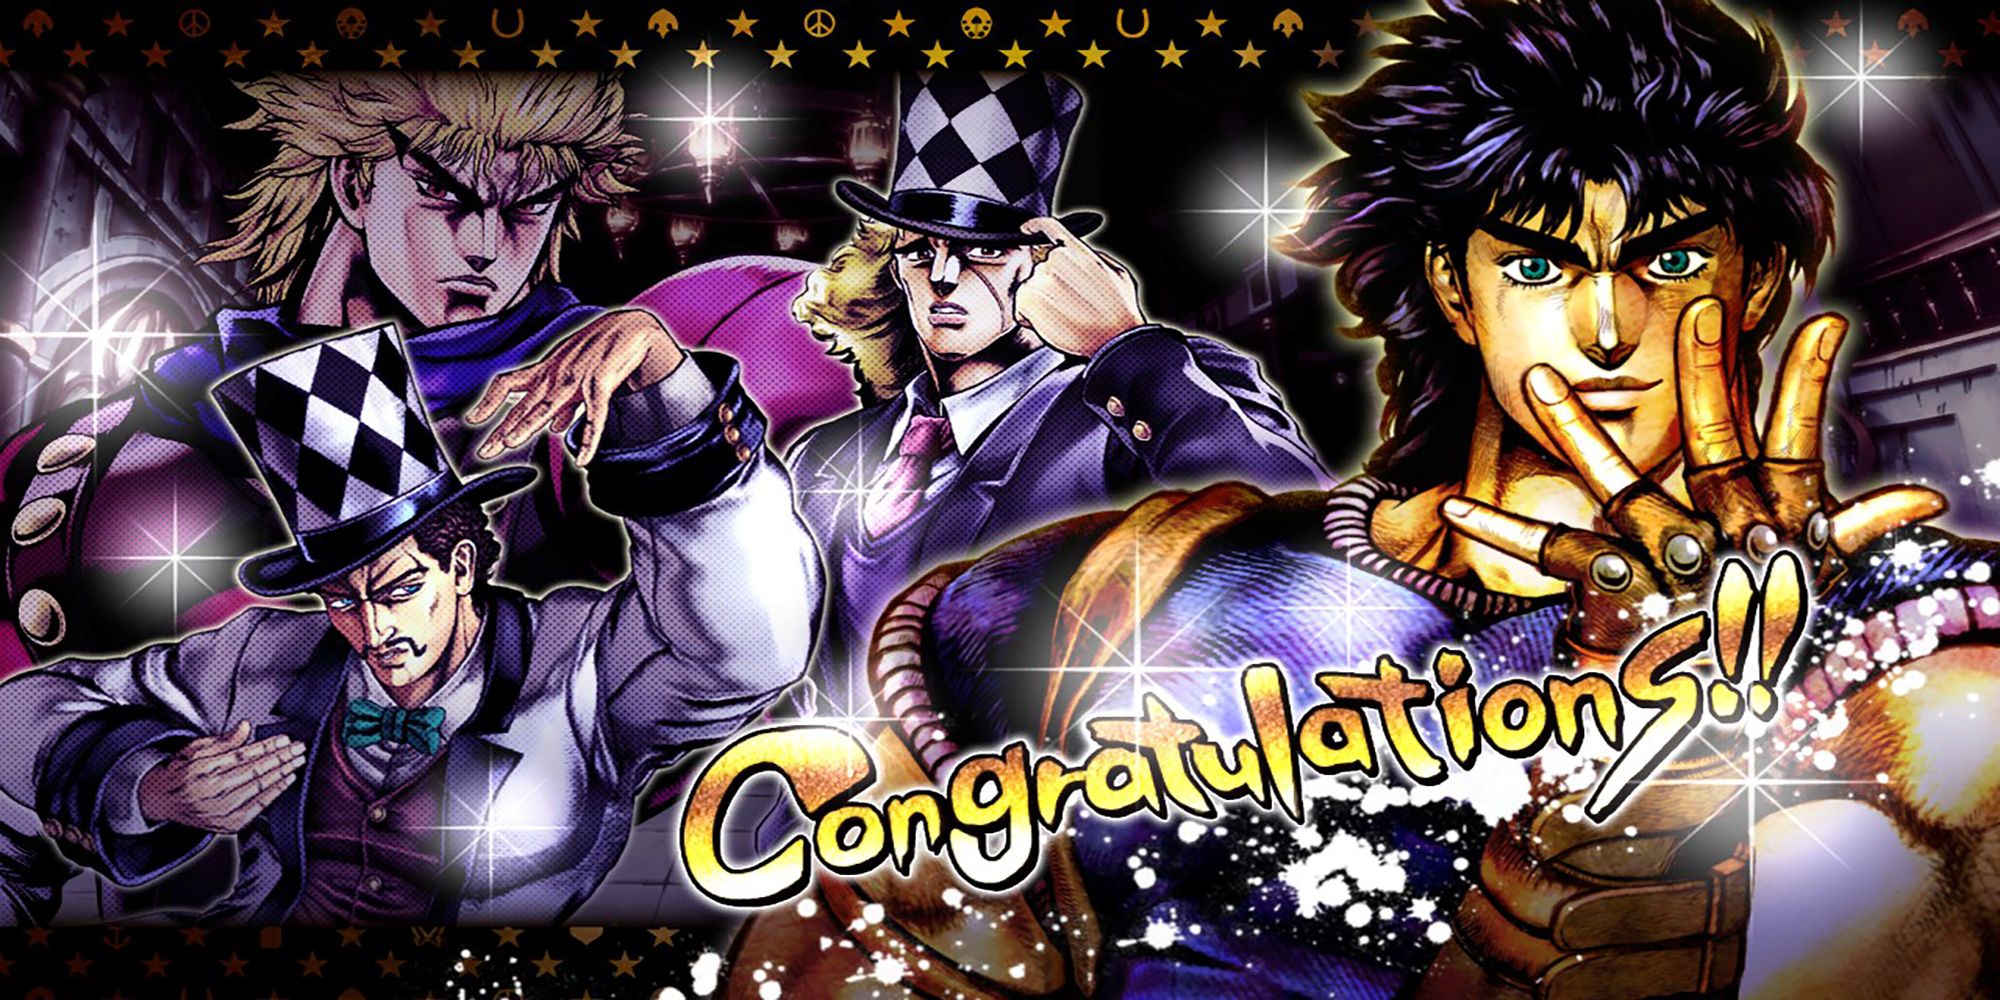 A special illustration featuring Dio Brando, Speedwagon, Zeppeli, and Jonathan for completing all of the Phantom Blood panels in All-Star Battle mode. Jojo's Bizarre Adventure ASBR.